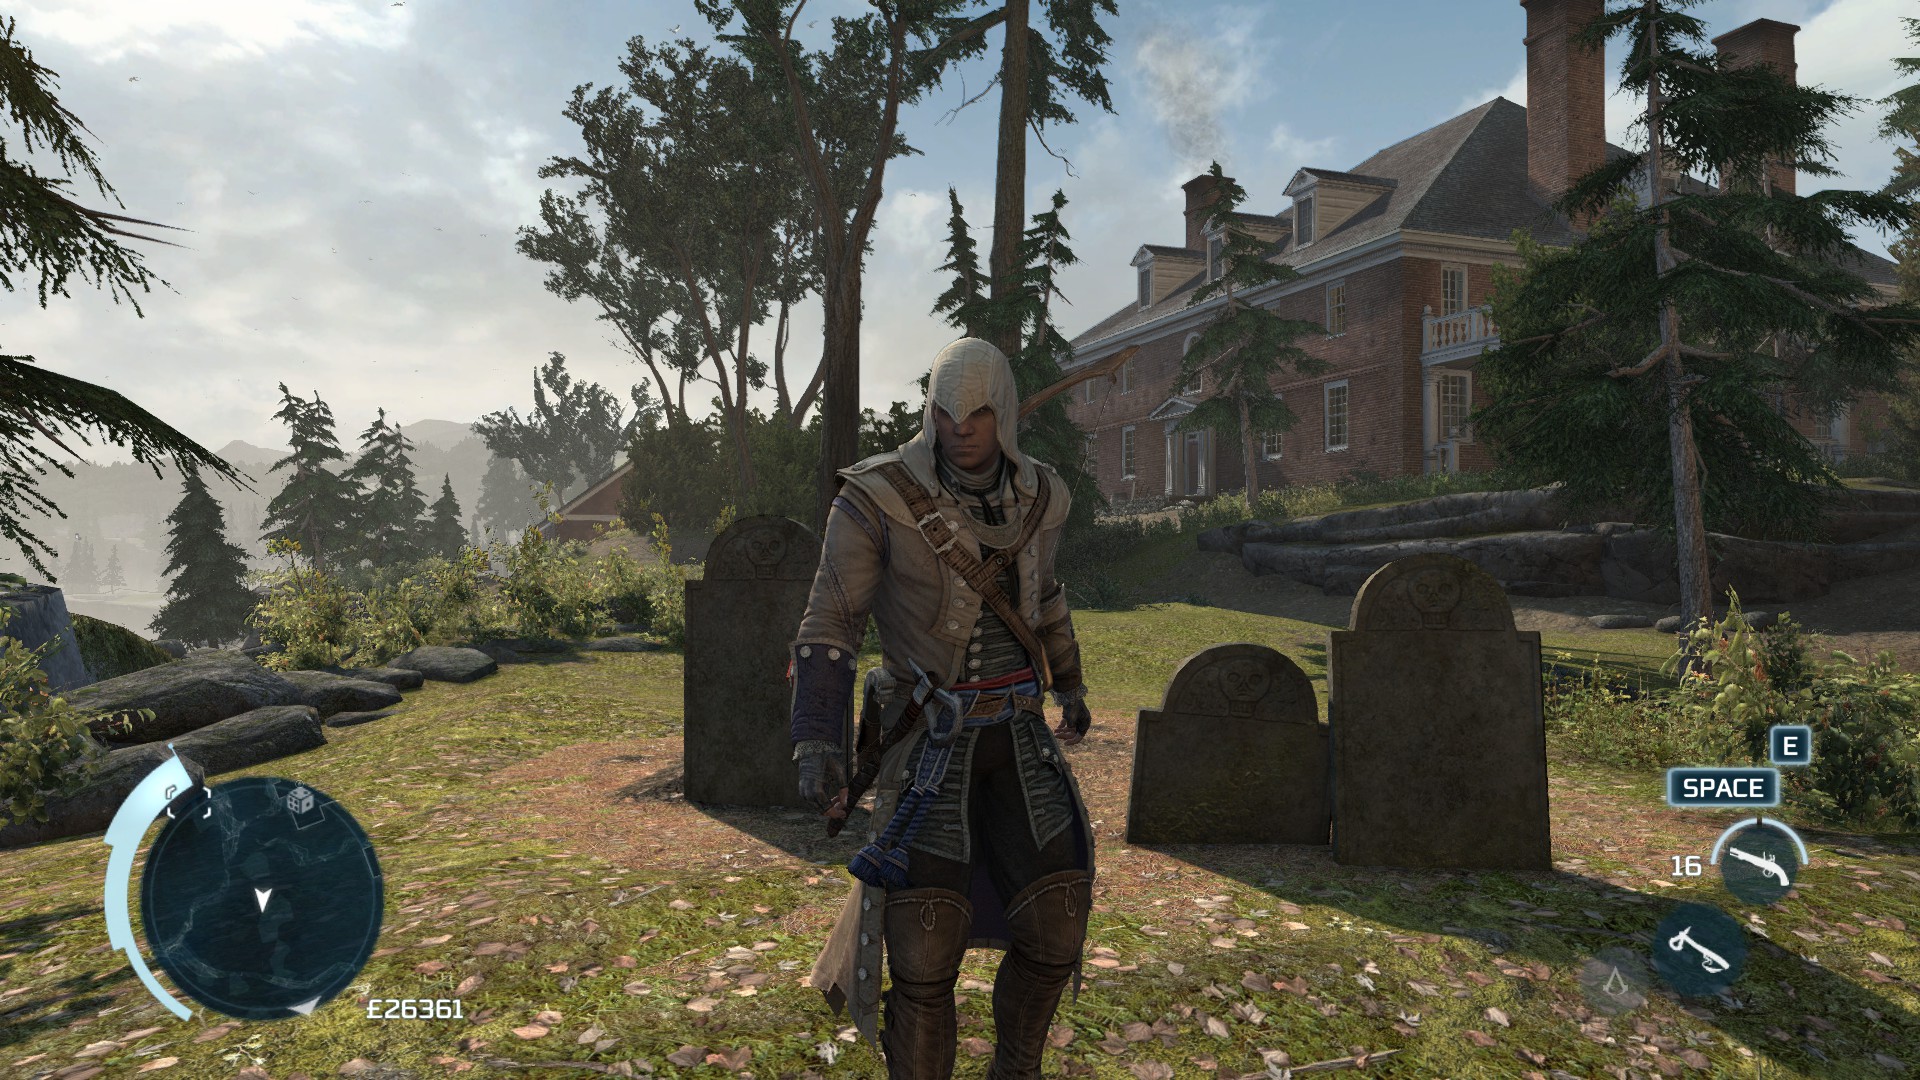 assassin creed 3 outfits